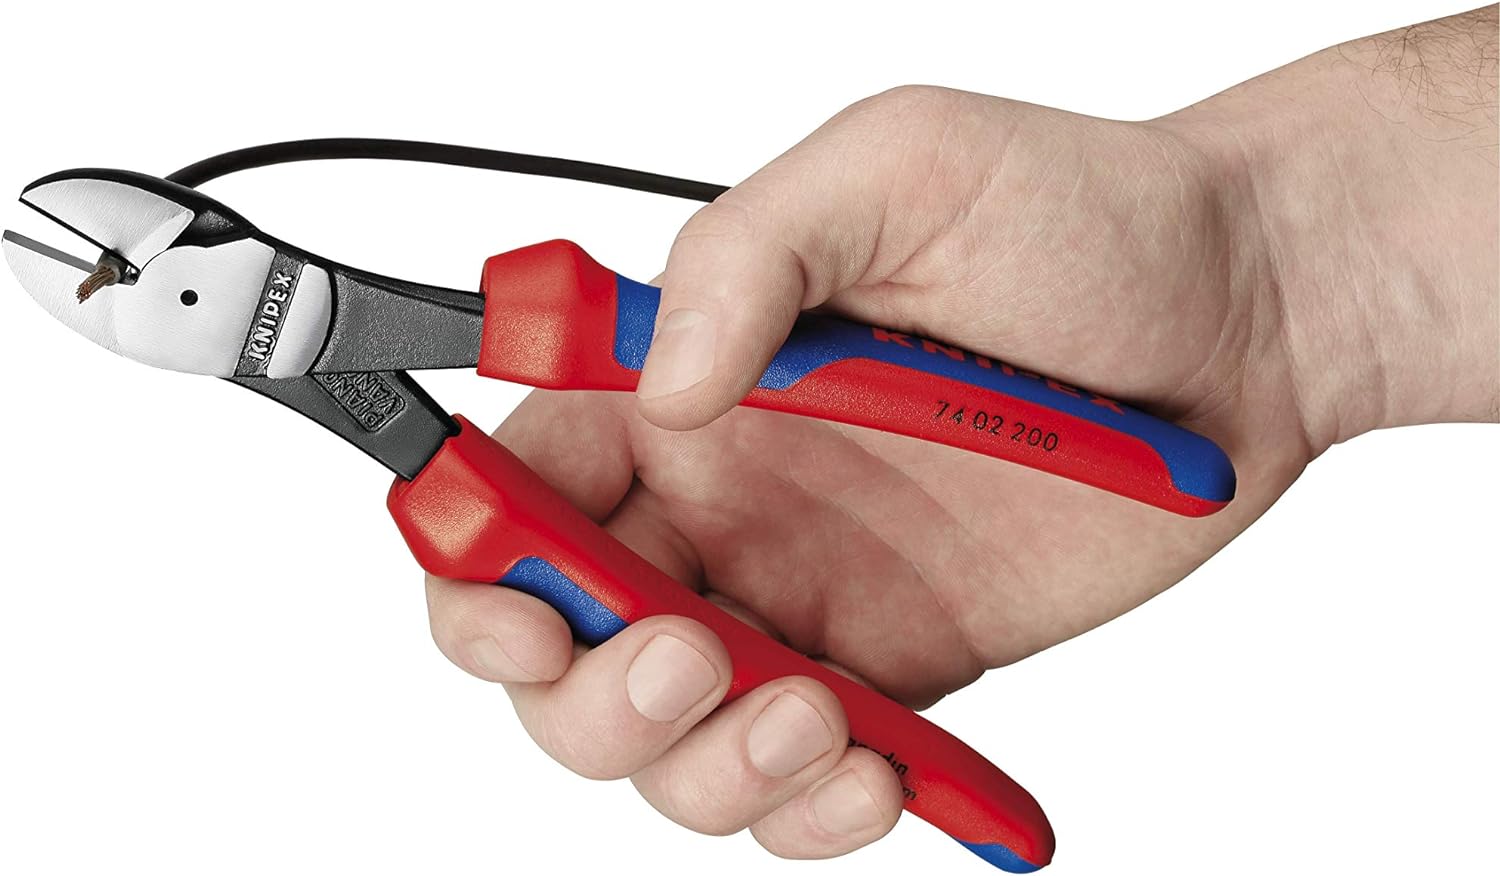 KNIPEX Tools KNIPEX - KPX7402200 Tools - High Leverage Diagonal Cutters, Multi-Component (7402200)